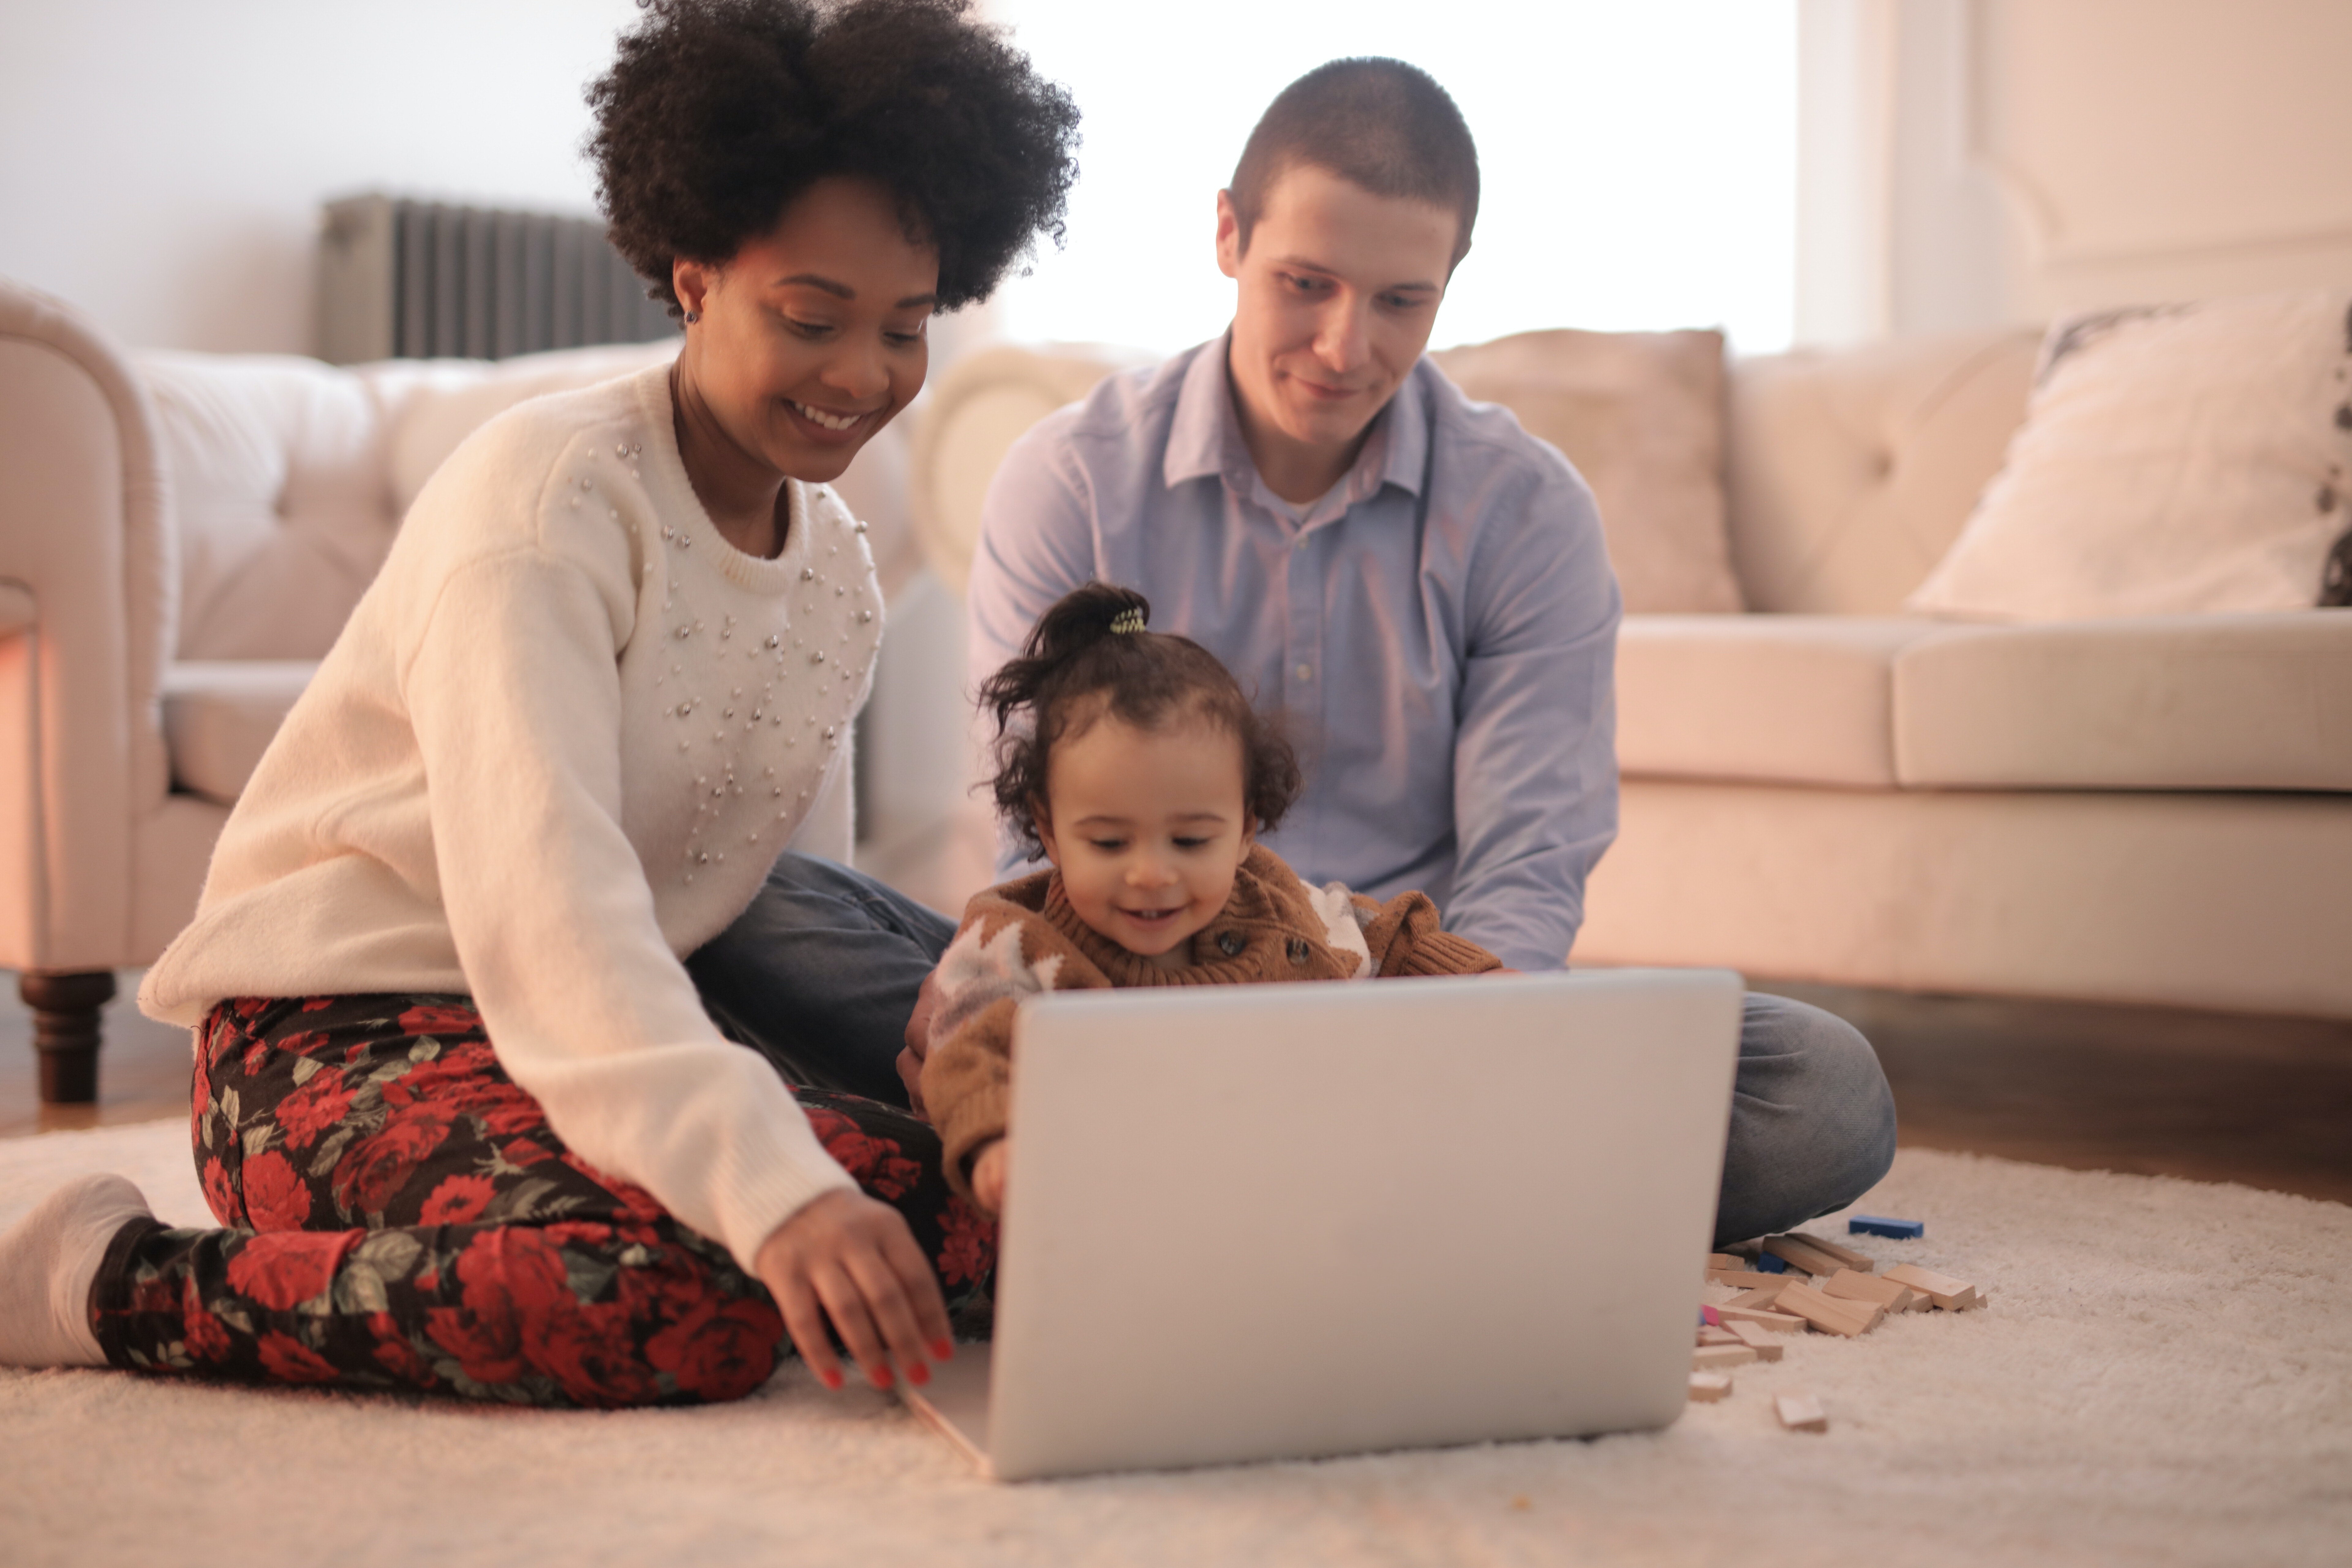 Mother and father sit with child on the floor with a laptop.